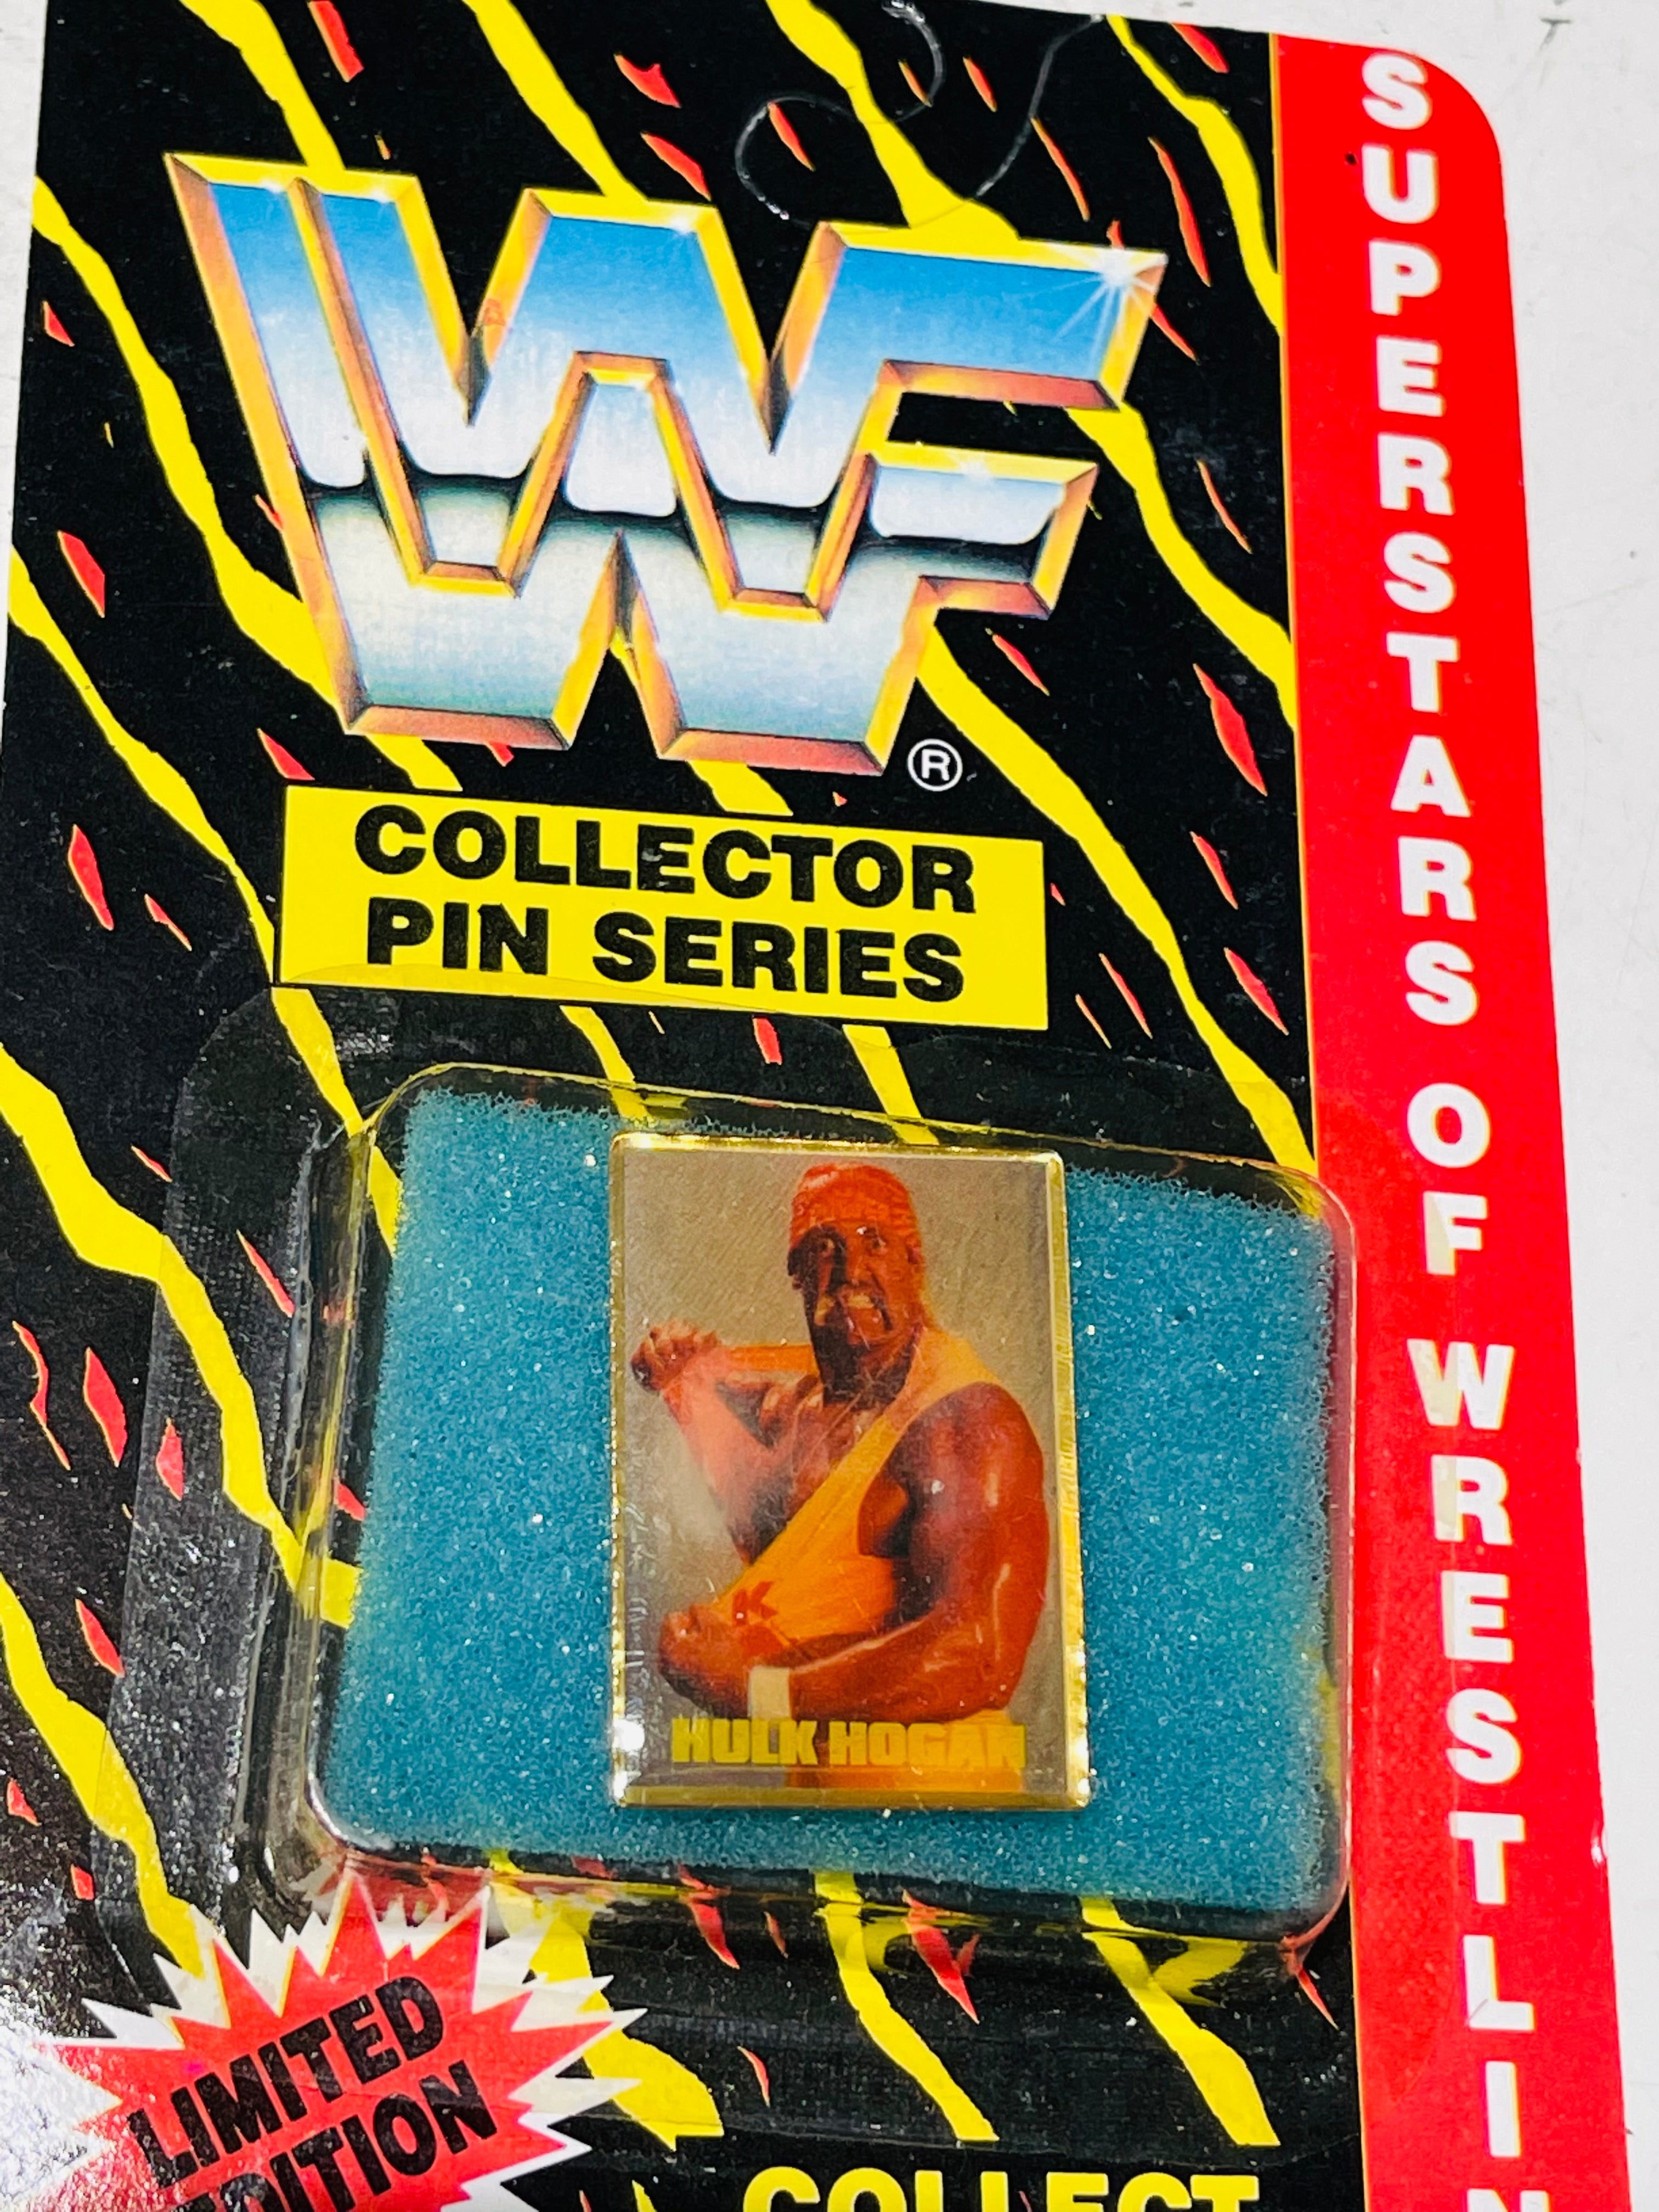 Hulk Hogan Wrestling rare collectible pin in package 1991